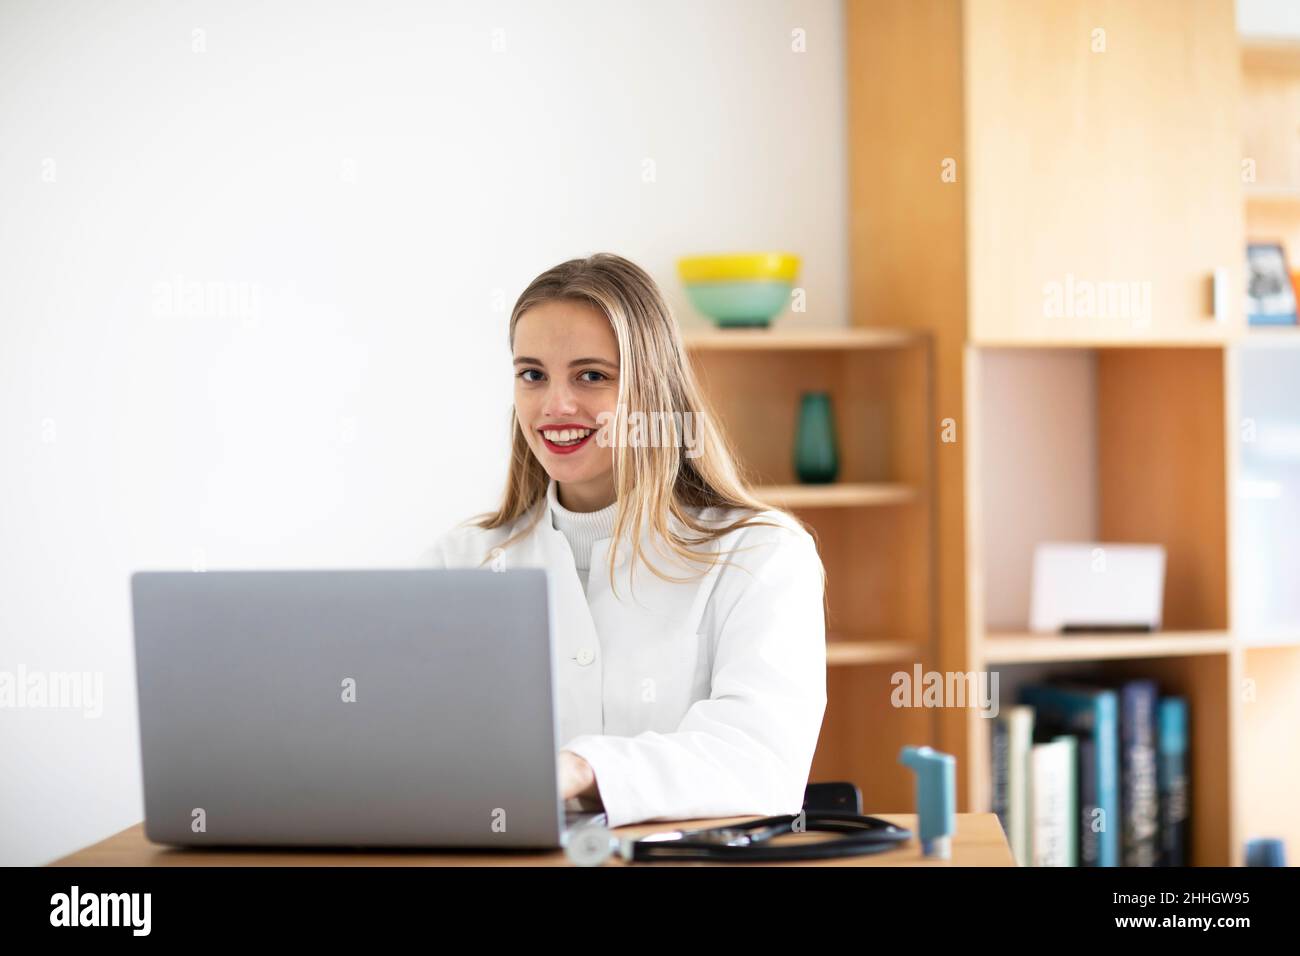 Smiling young female doctor using laptop Stock Photo